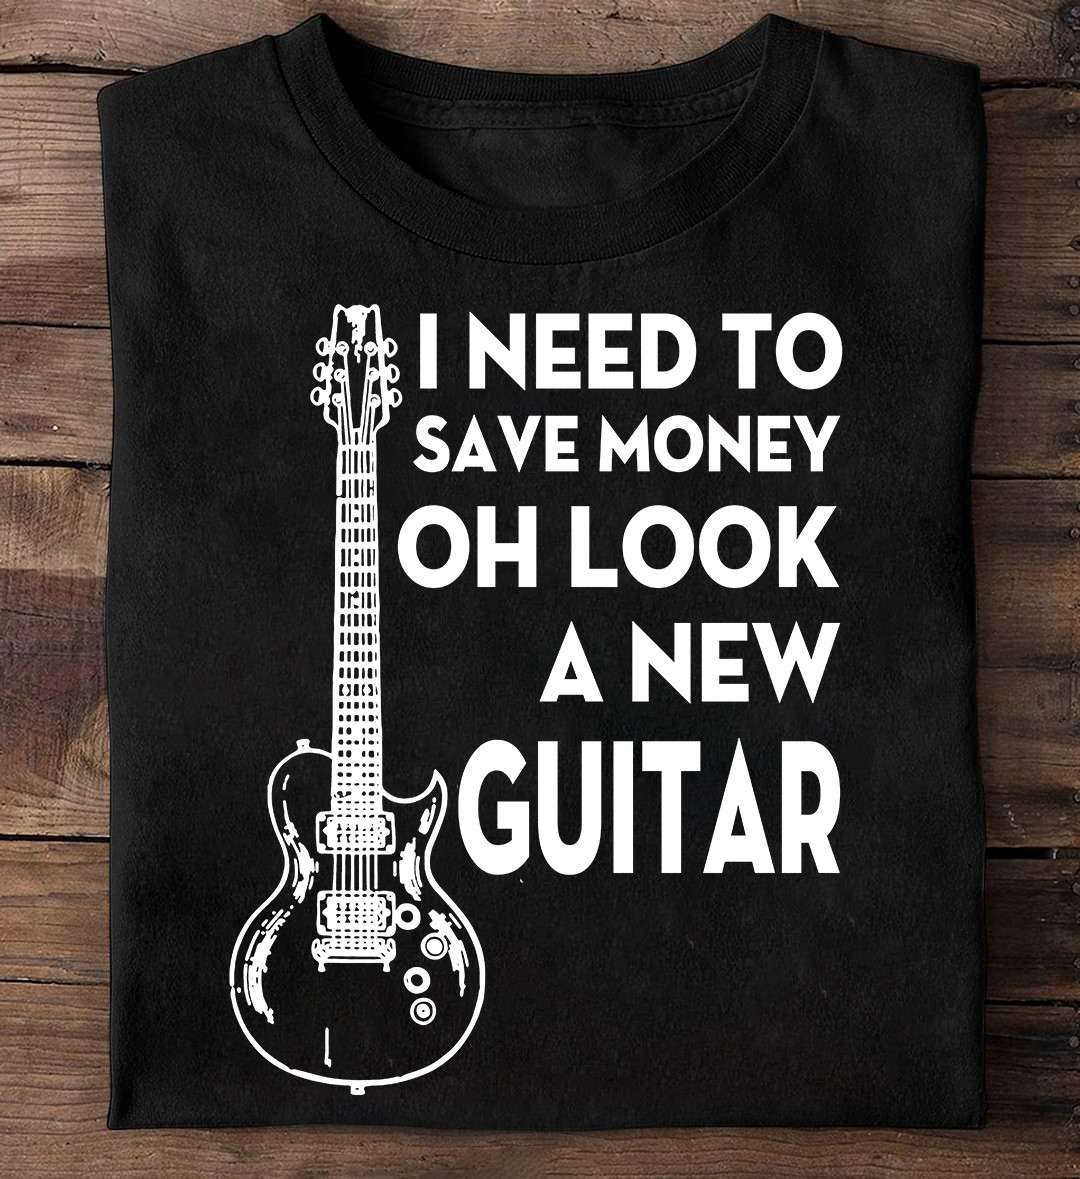 I need to save money - Oh look a new guitar, like buying new guitars, guitar collector